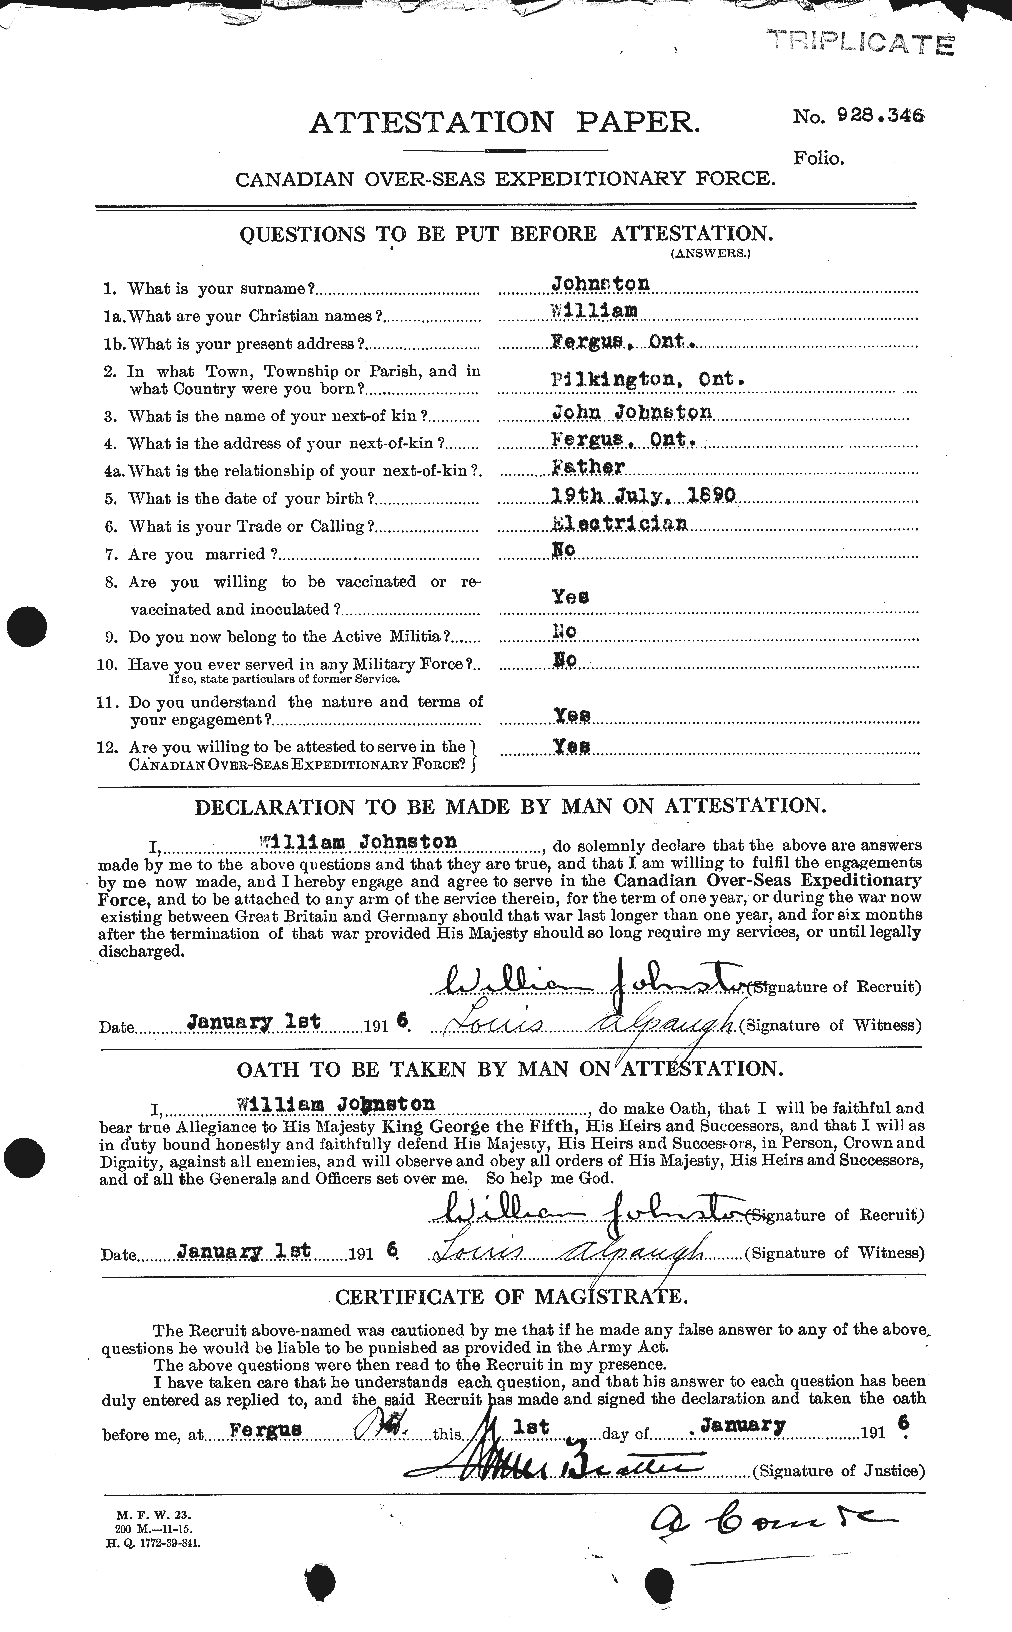 Personnel Records of the First World War - CEF 427278a